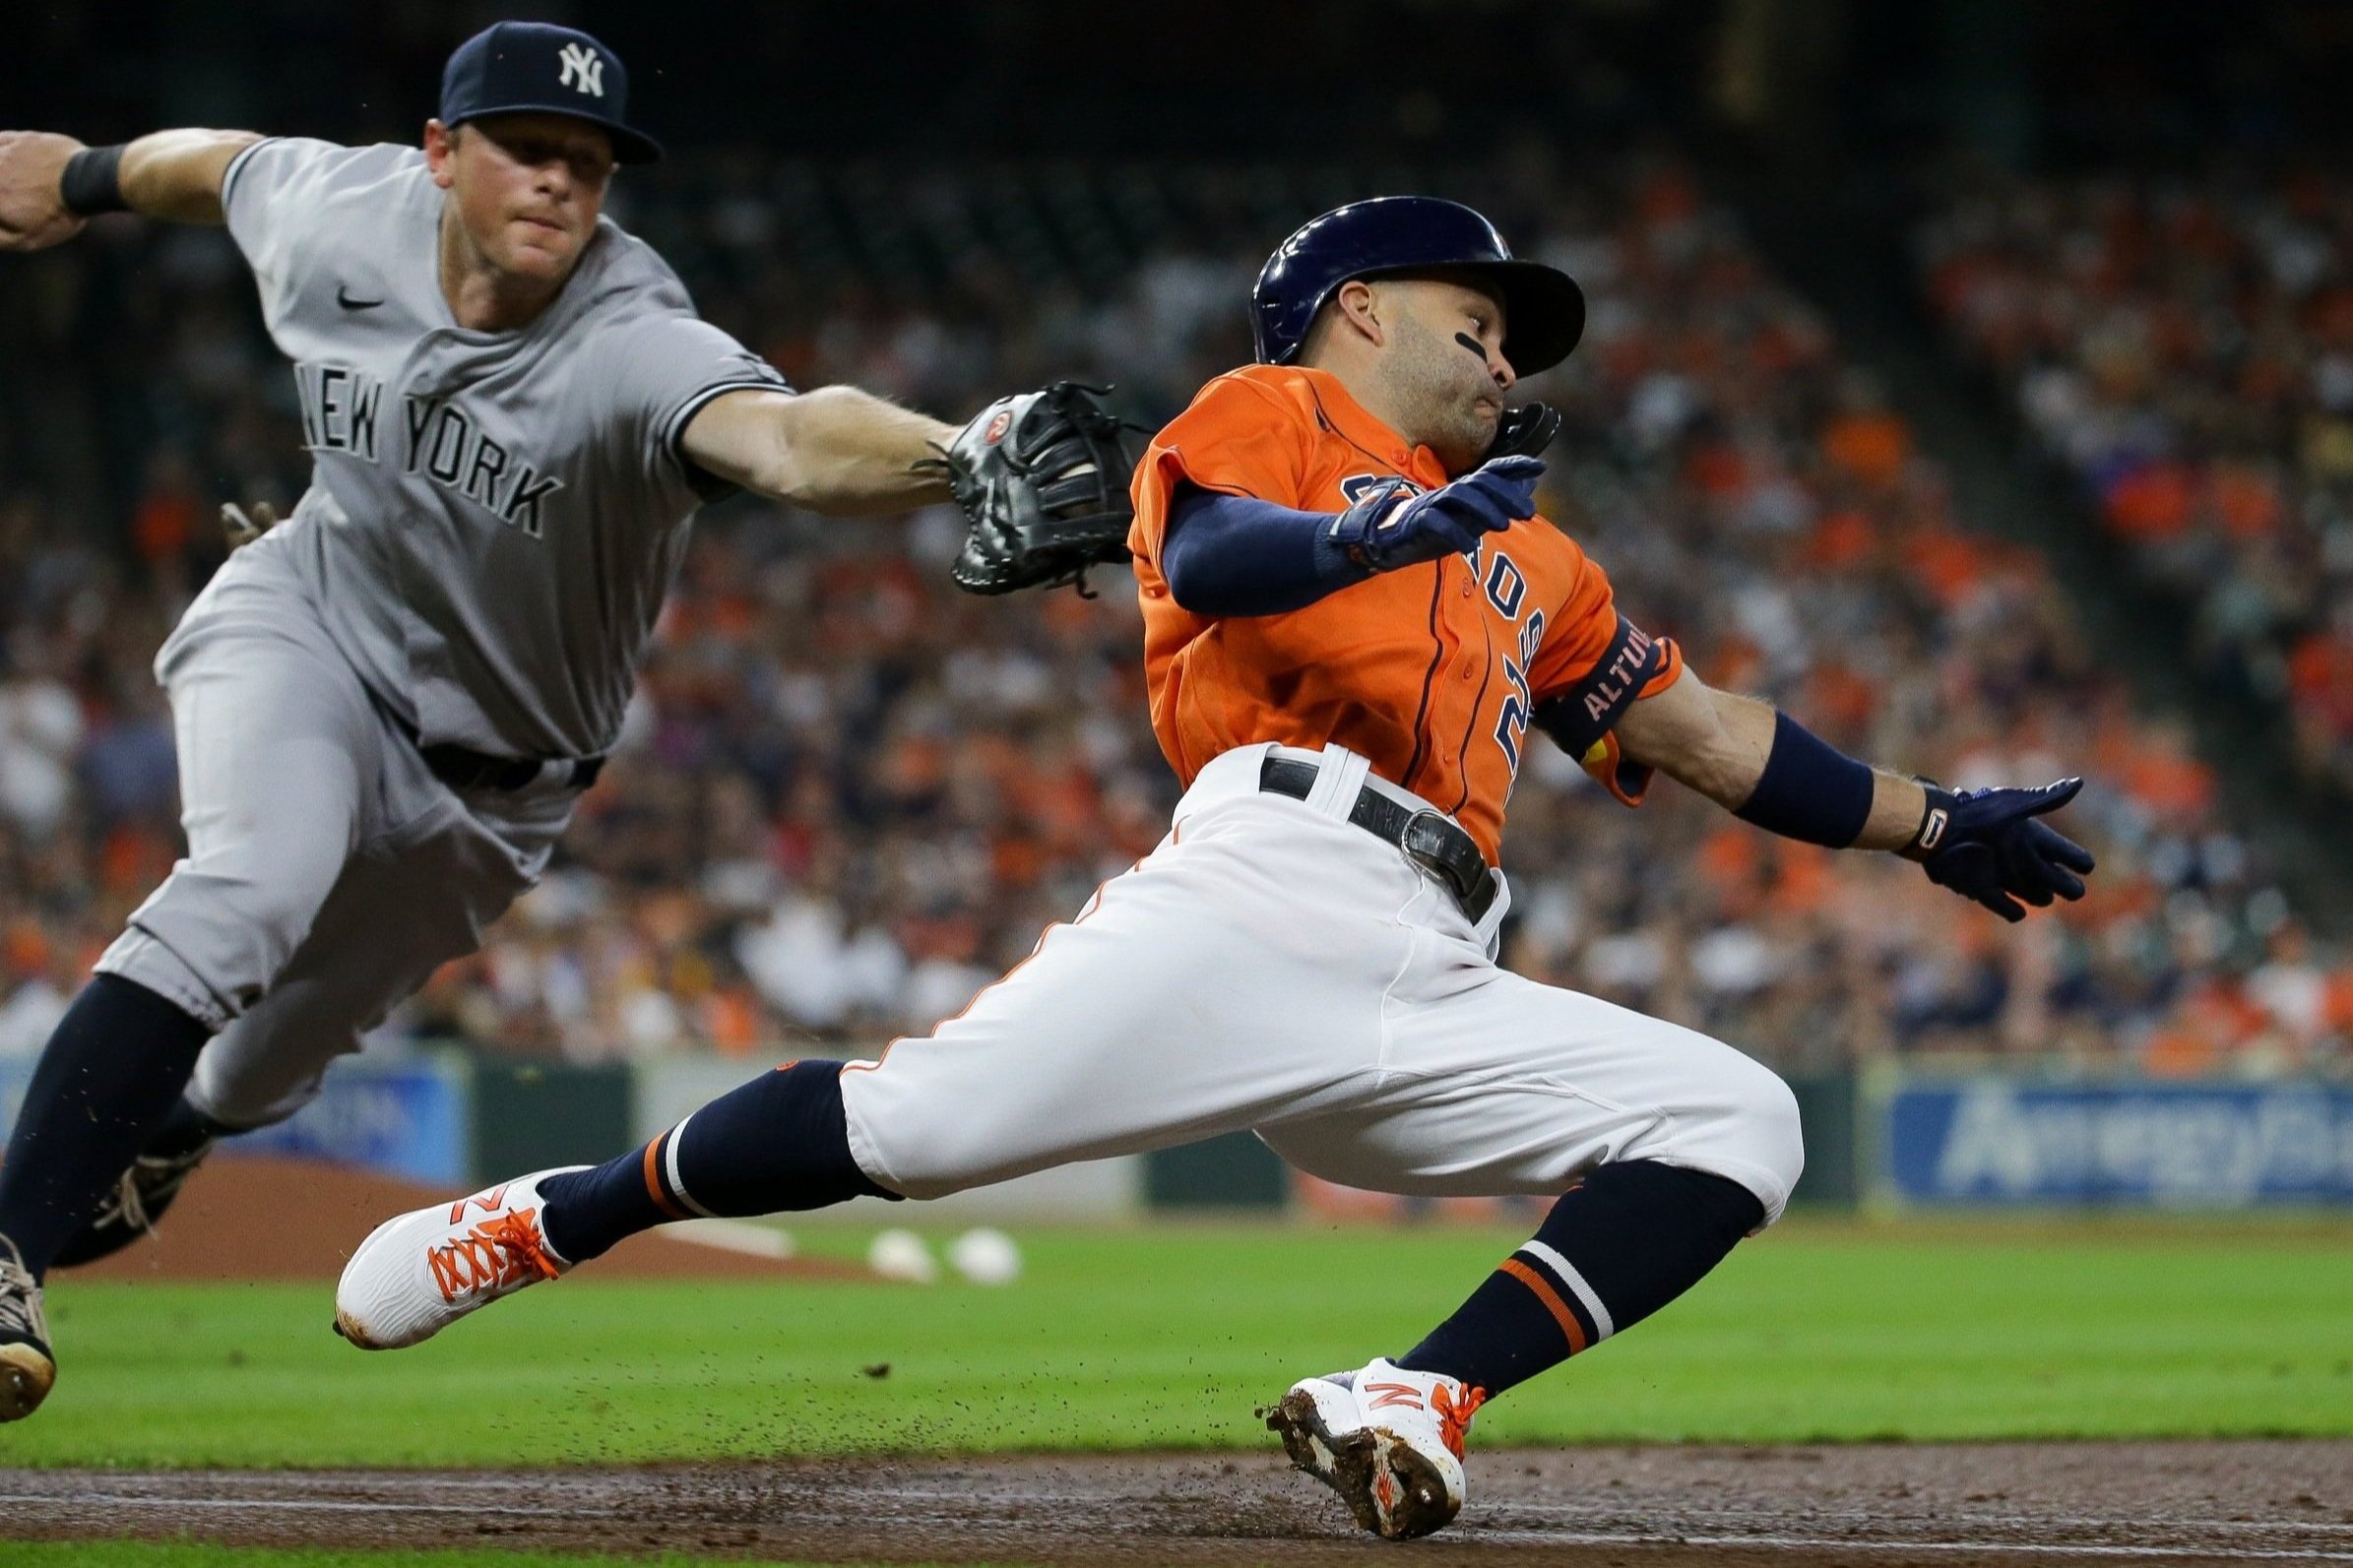  Houston Astros second baseman Jose Altuve (27) unsuccessfully tries to avoid the tag by New York Yankees first baseman DJ LeMahieu (26) during the first inning of an MLB game at Minute Maid Park on Friday, July 9, 2021, in Houston.  